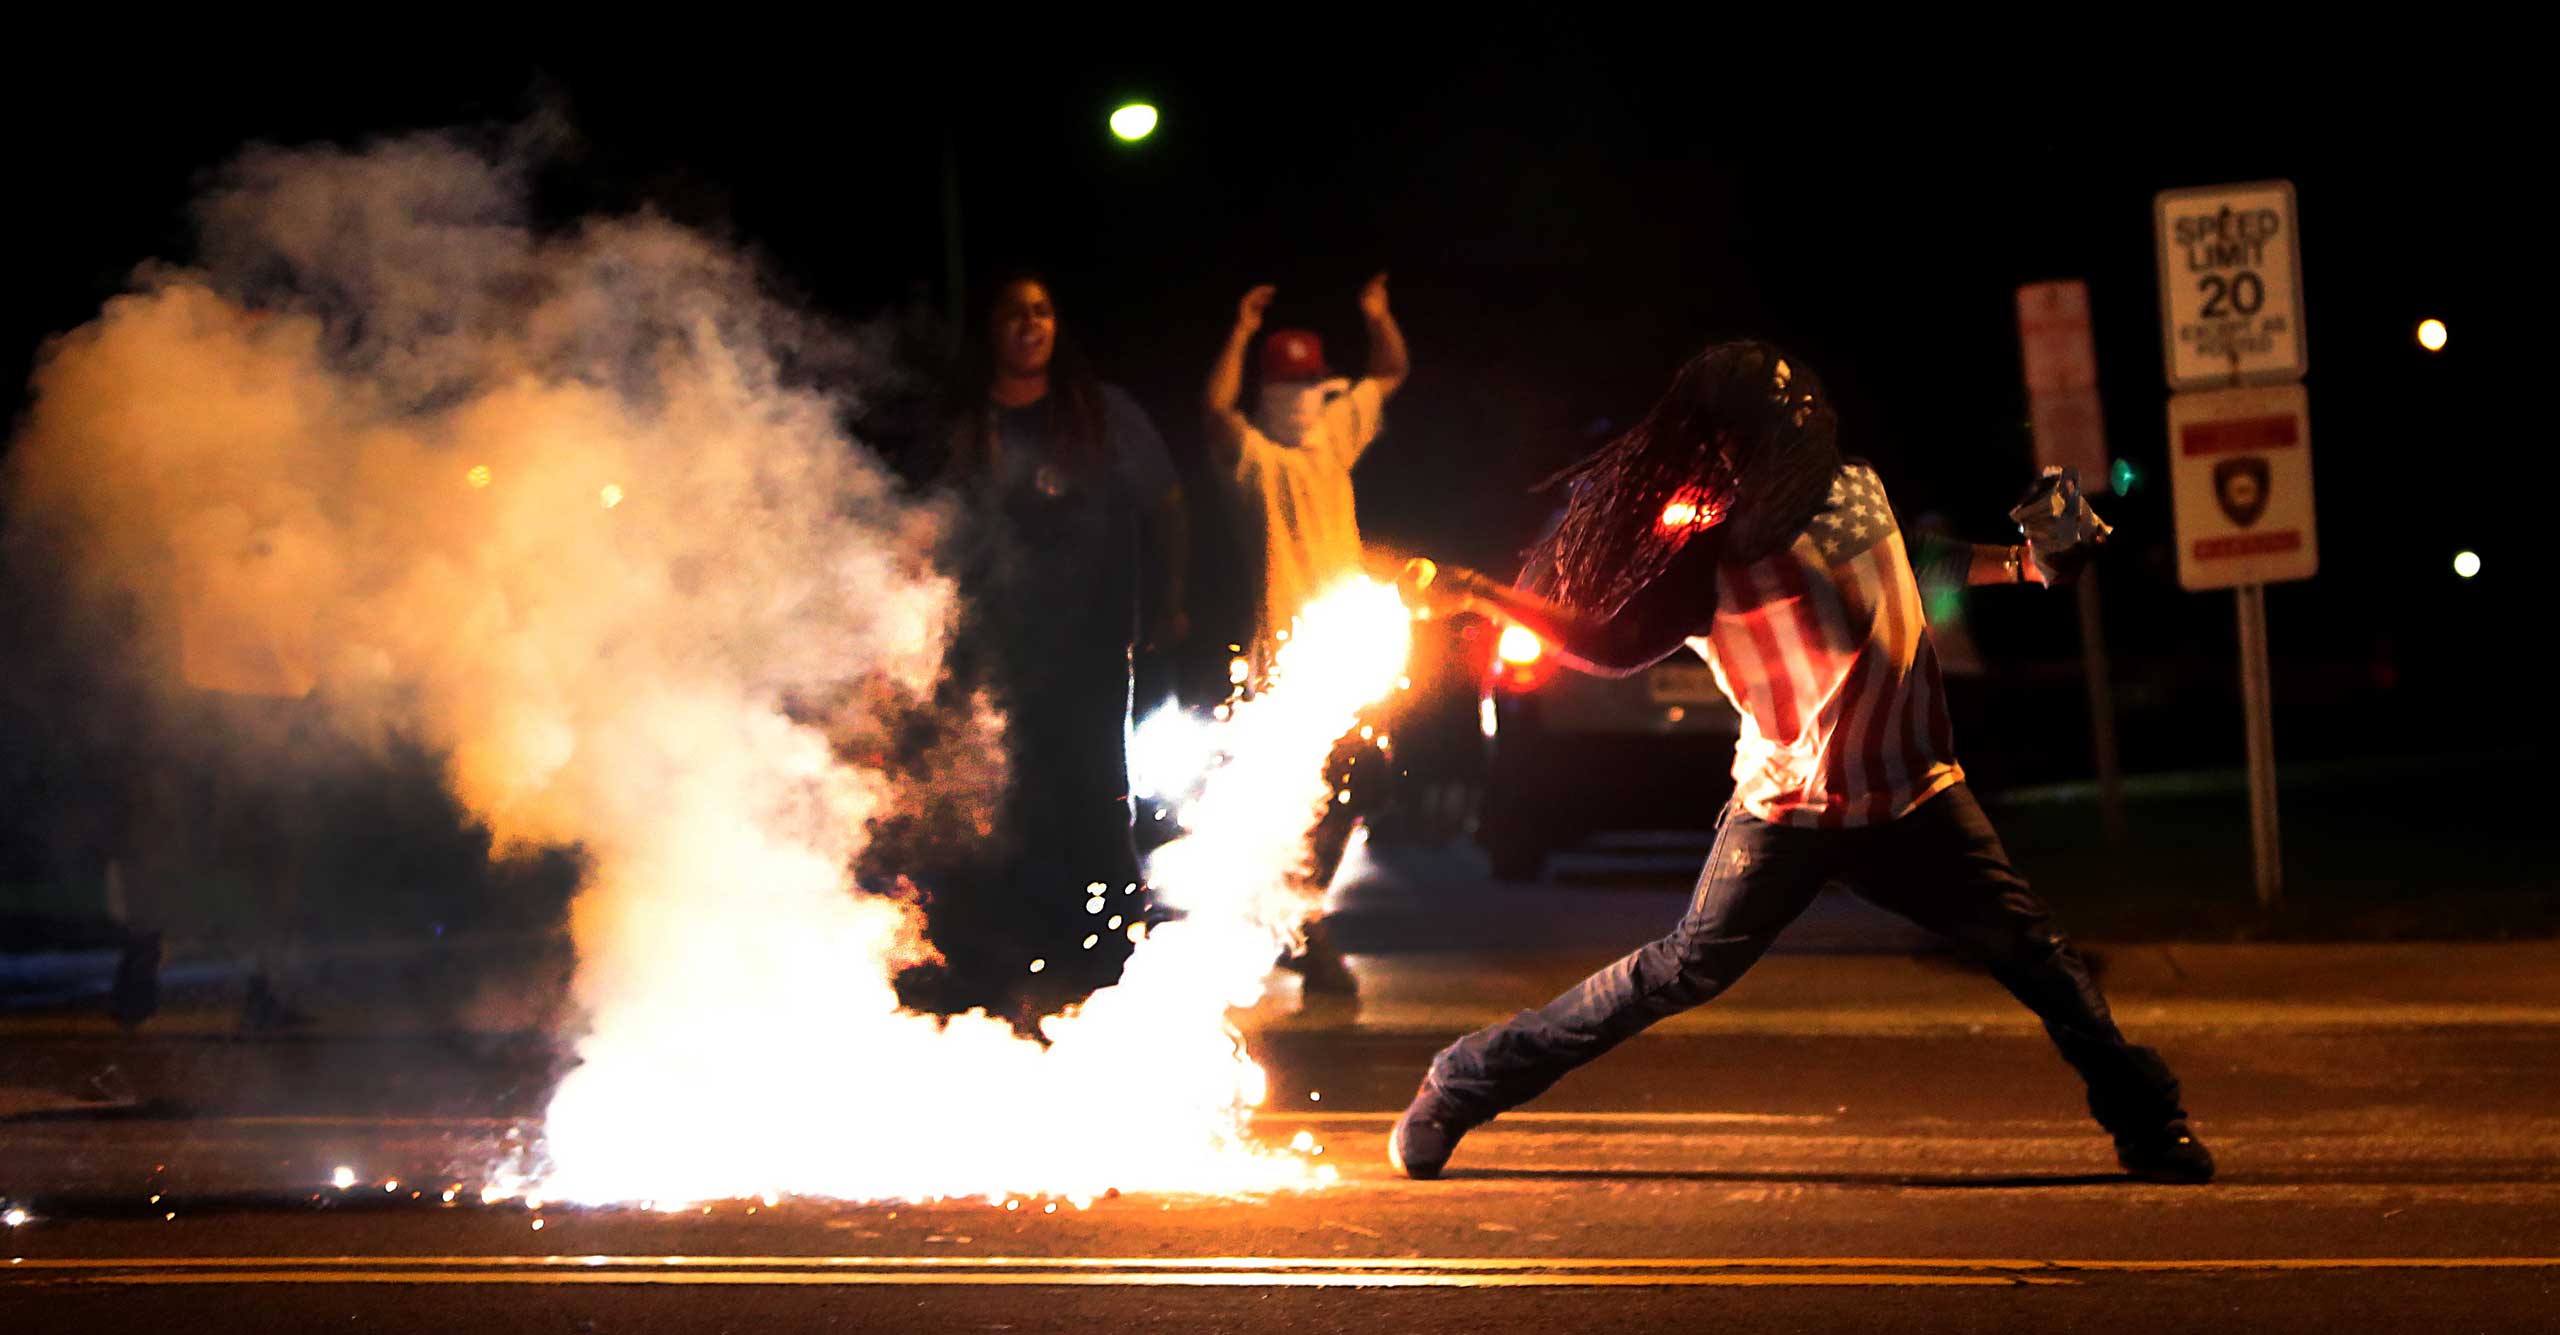 Aug. 13, 2014. A demonstrator throws back a tear gas container after tactical officers worked to break up a group of bystanders on Chambers Road and West Florissant on Wednesday, in St. Louis. Nights of unrest have vied with calls for calm in a St. Louis suburb where an unarmed black teenager was killed by police, while the community is still pressing for answers about the weekend shooting.